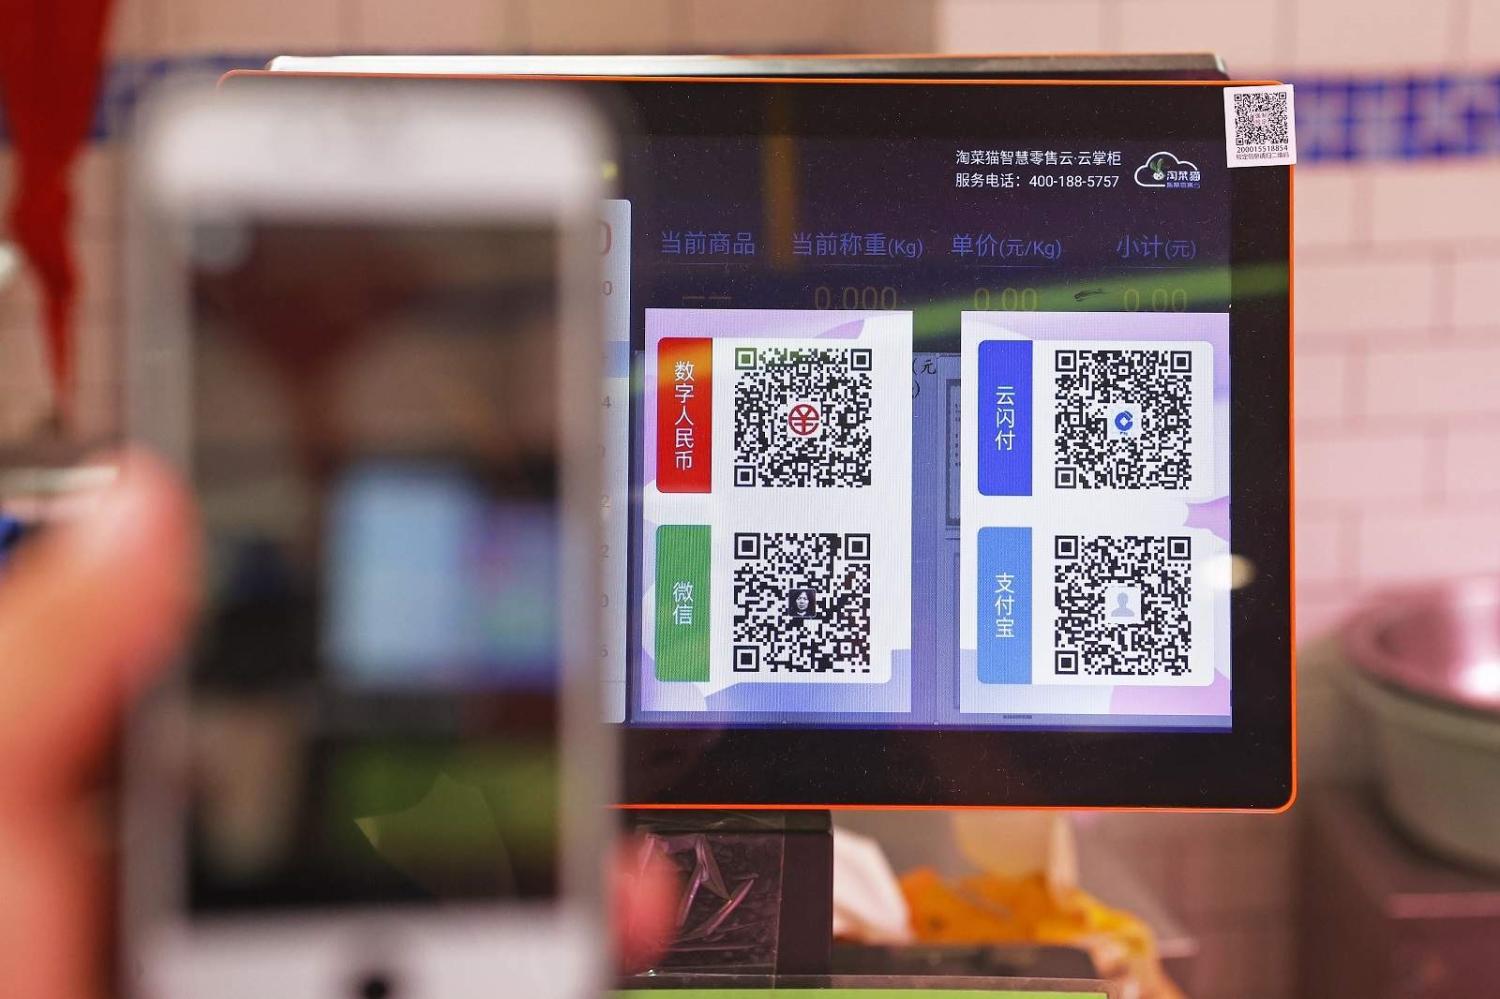 A customer chooses from QR payment codes for digital payment services e-CNY, UnionPay, Alipay and Wechat at a vegetable market in Shanghai on 7 May 2021 (Yin Liqin/China News Service via Getty Images)